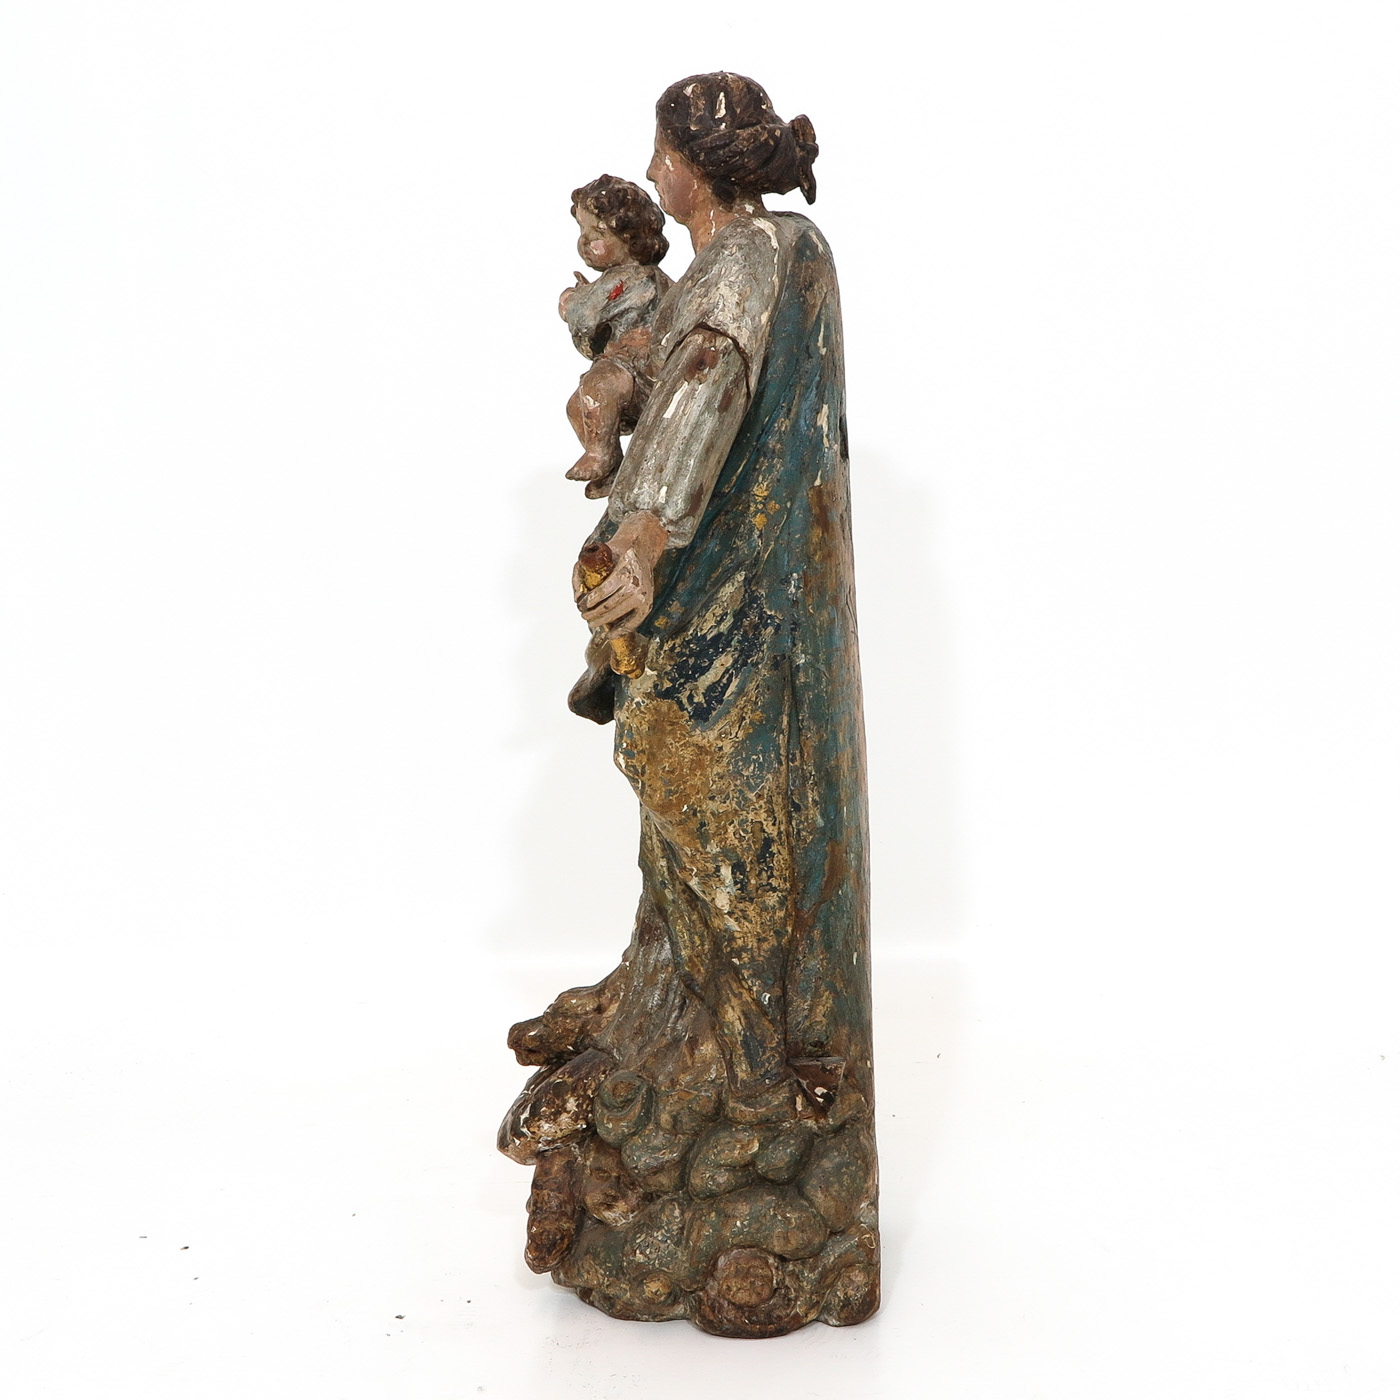 A 17th - 18th Century Madonna and Child Sculpture - Image 2 of 4